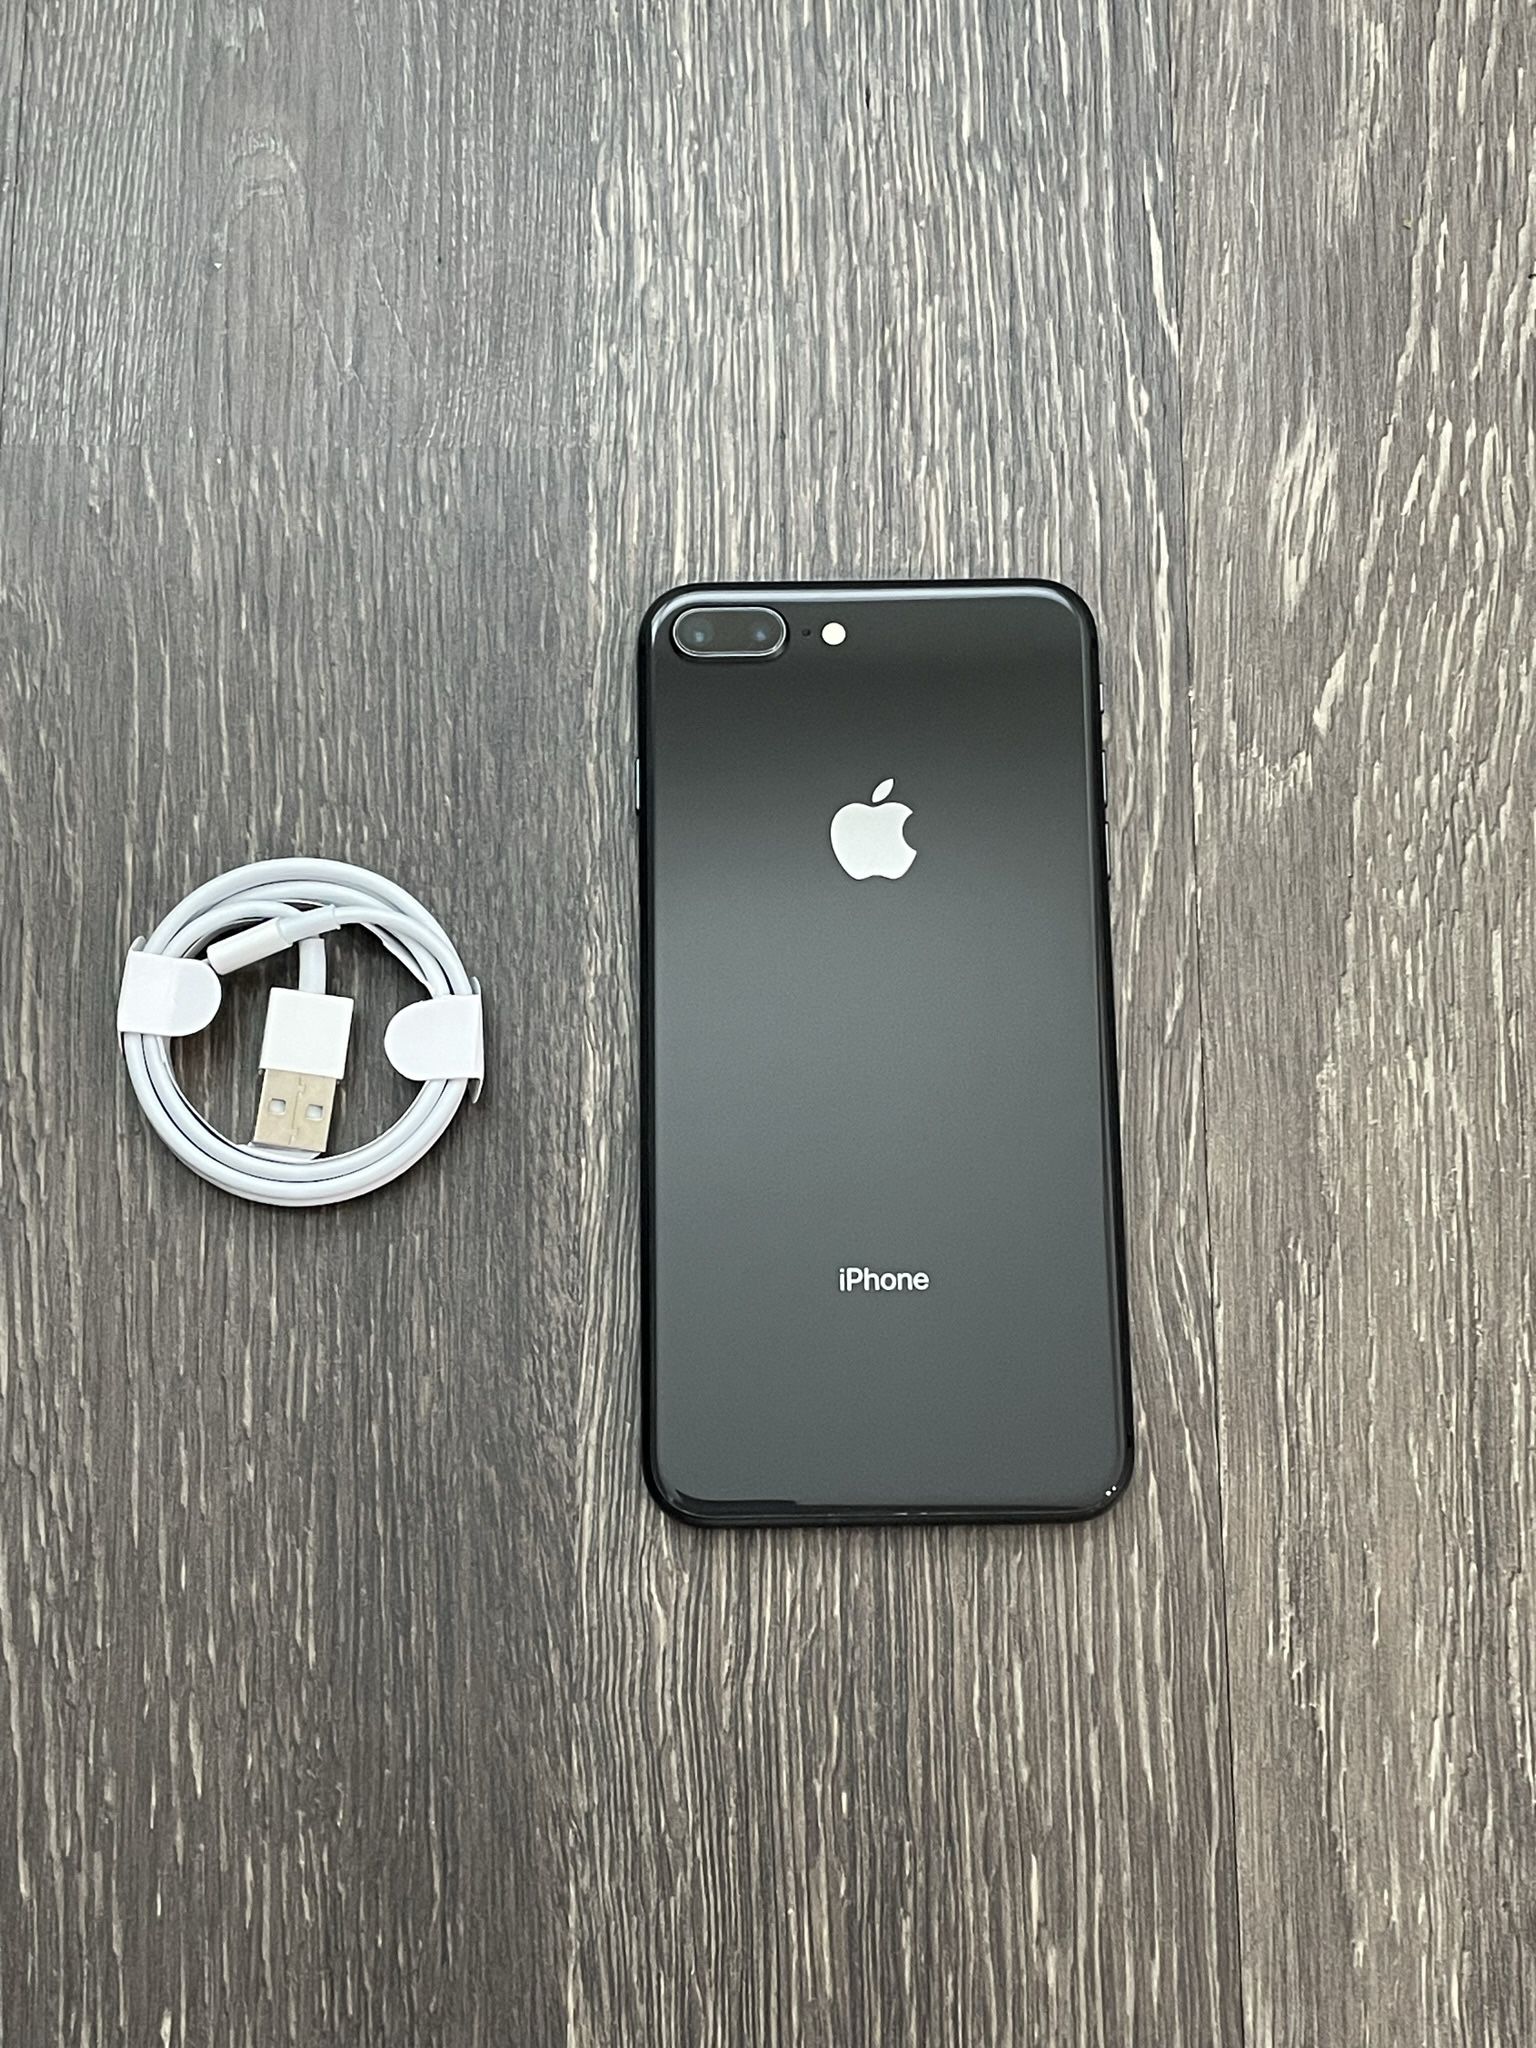 iPhone 8 Plus UNLOCKED FOR ALL CARRIERS!